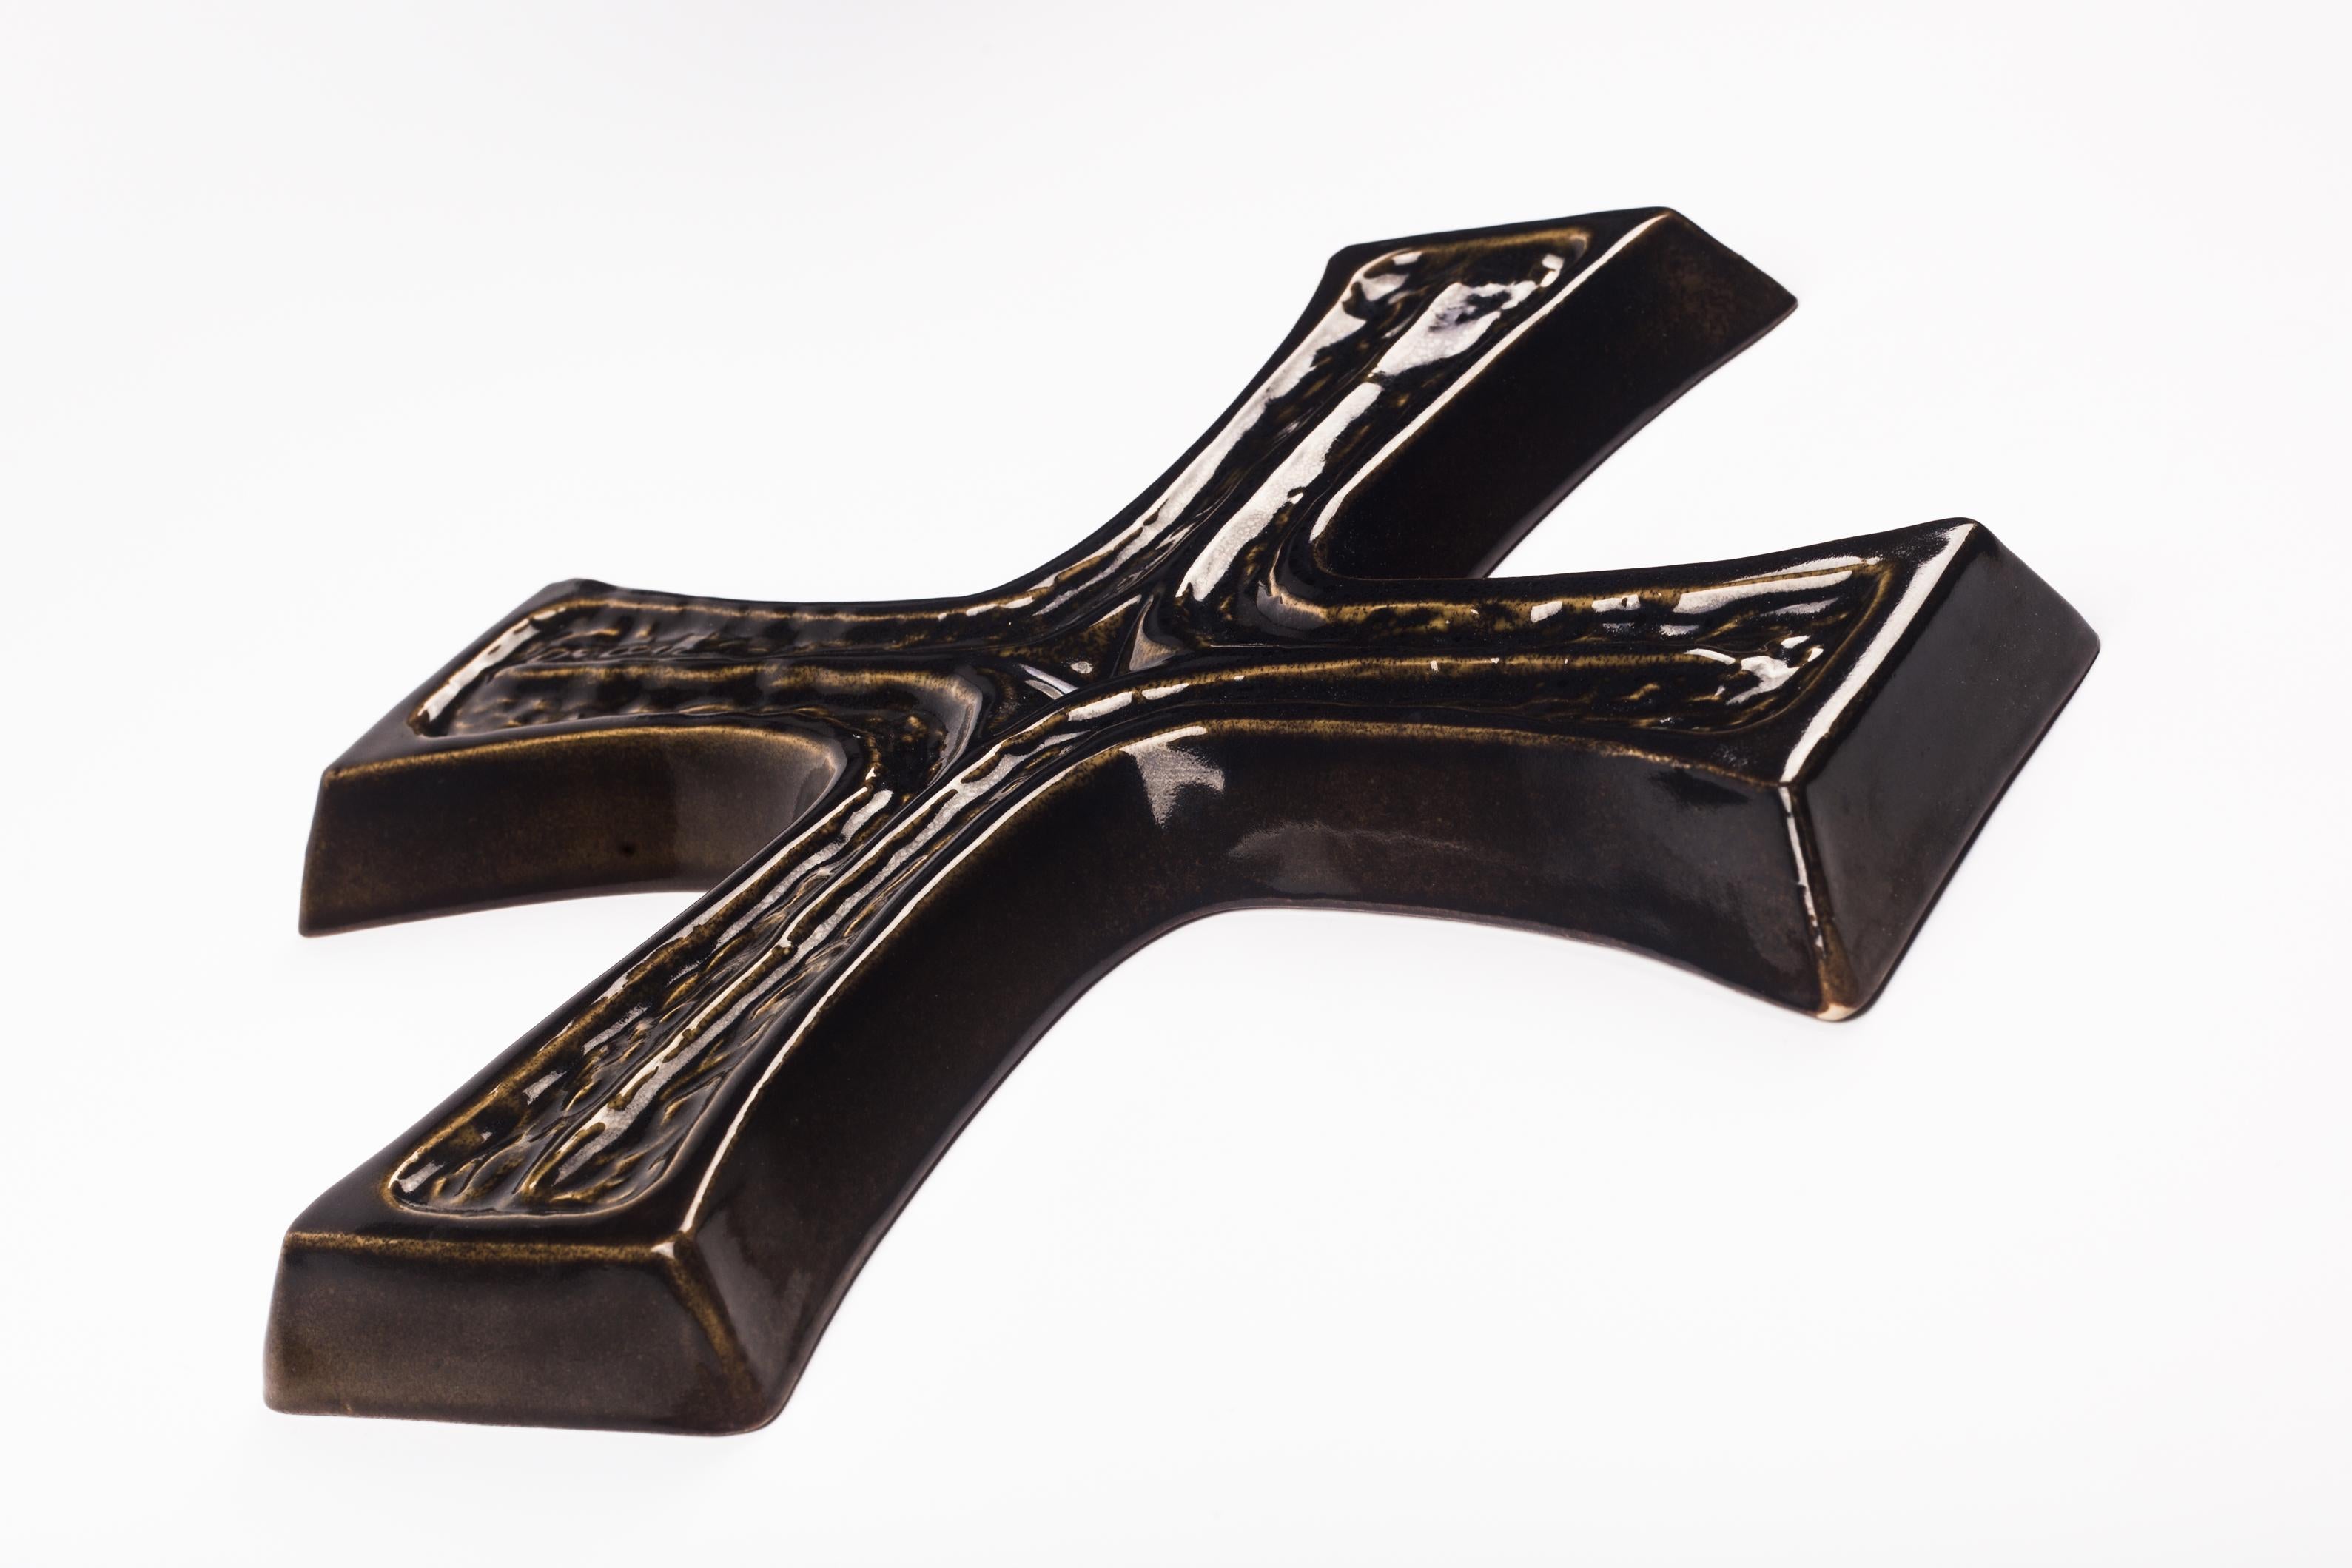 Large glazed wall cross in brown with textured design. This is a handmade one-of-a-kind piece that was part of a large collection of Belgian crosses made by artisan potters in the 1950s-1970s. A unique decorative item for anyone interested in Folk